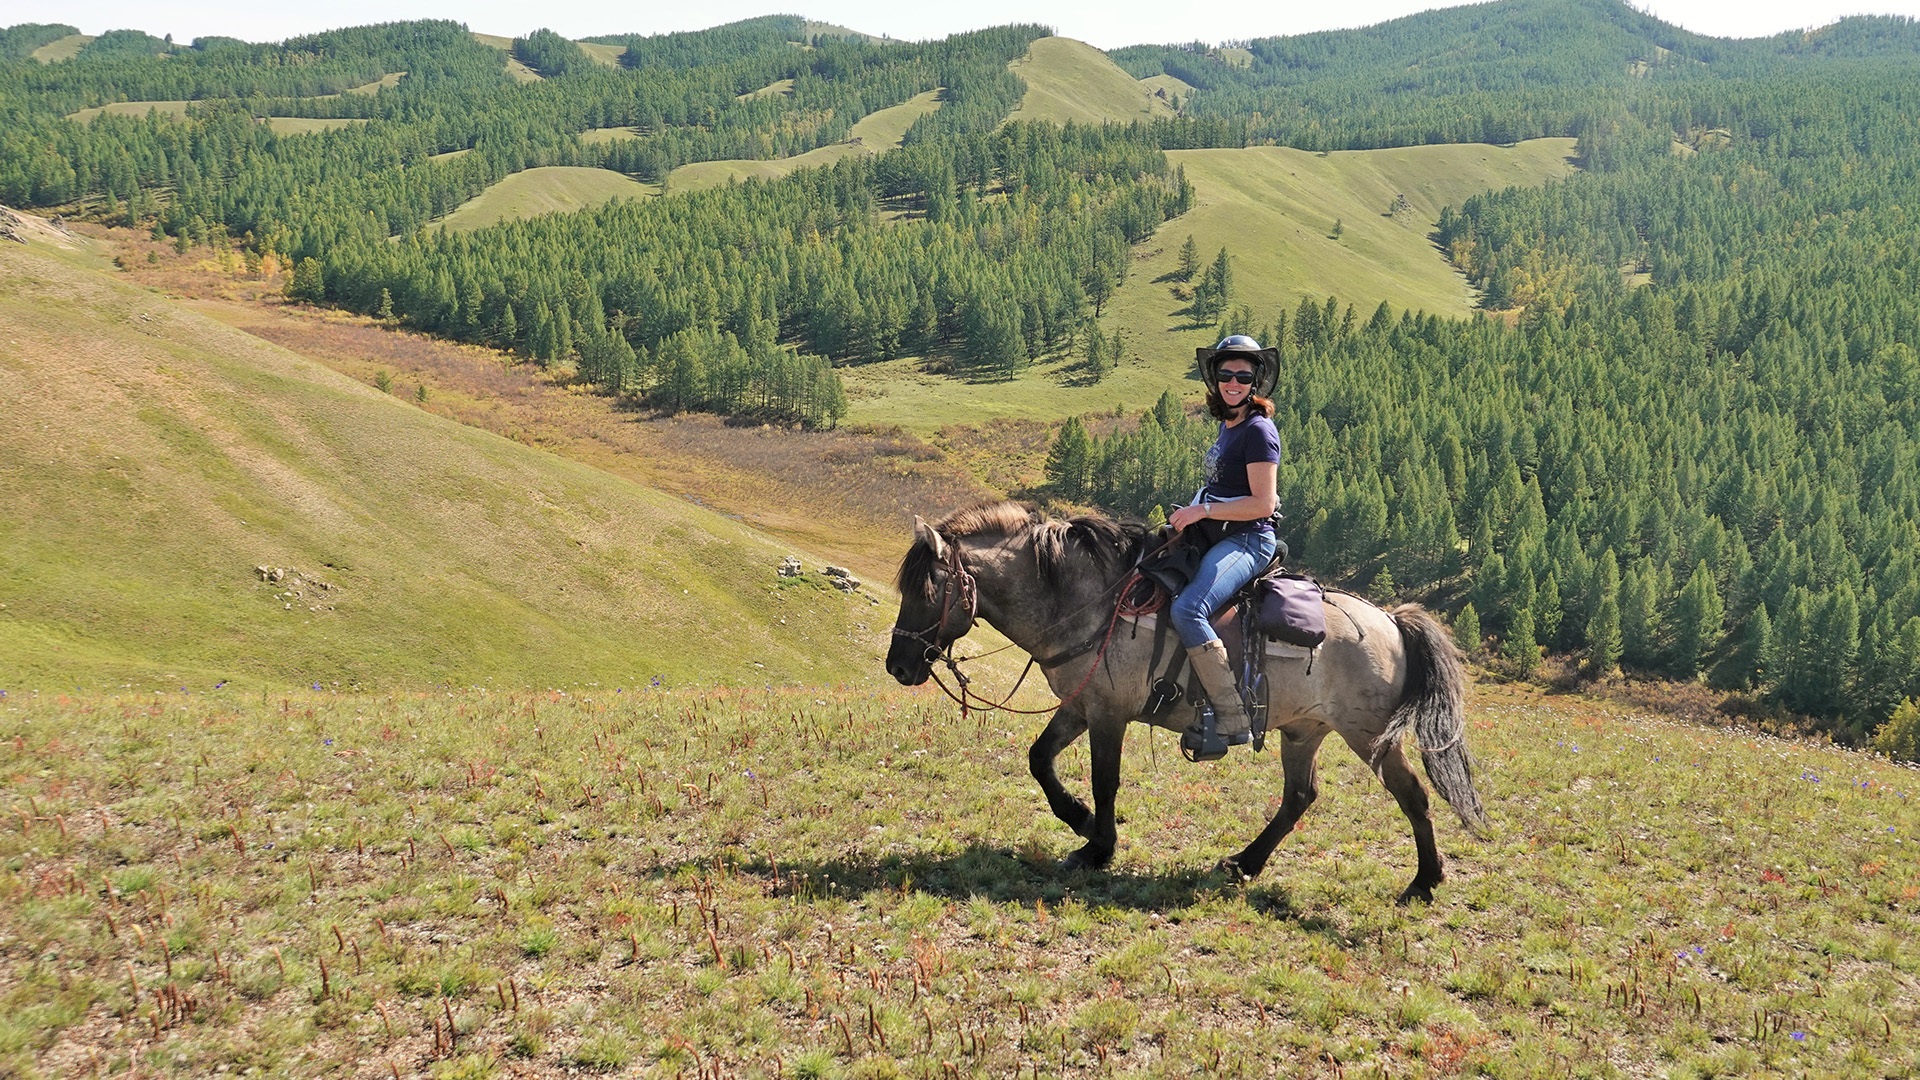 What Are the Horseback Riding Tours to Remote Locations in Mongolia?